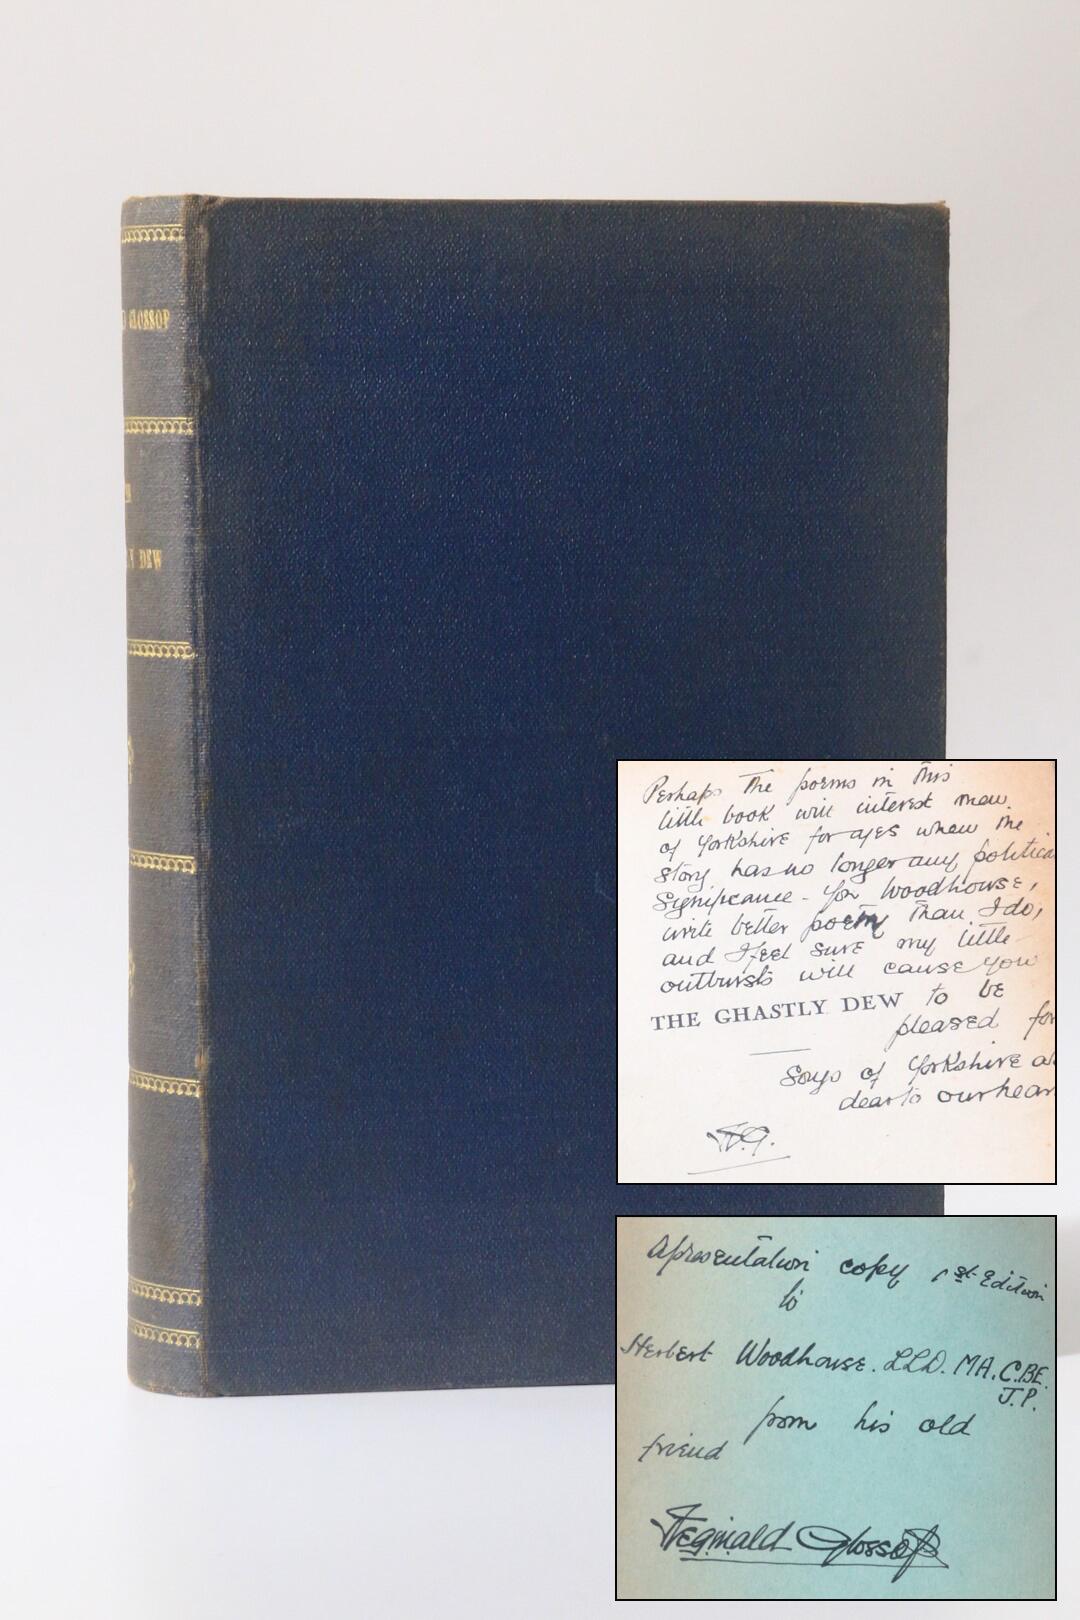 Reginald Glossop - The Ghastly Dew - Glossop, 1932, Signed First Edition.